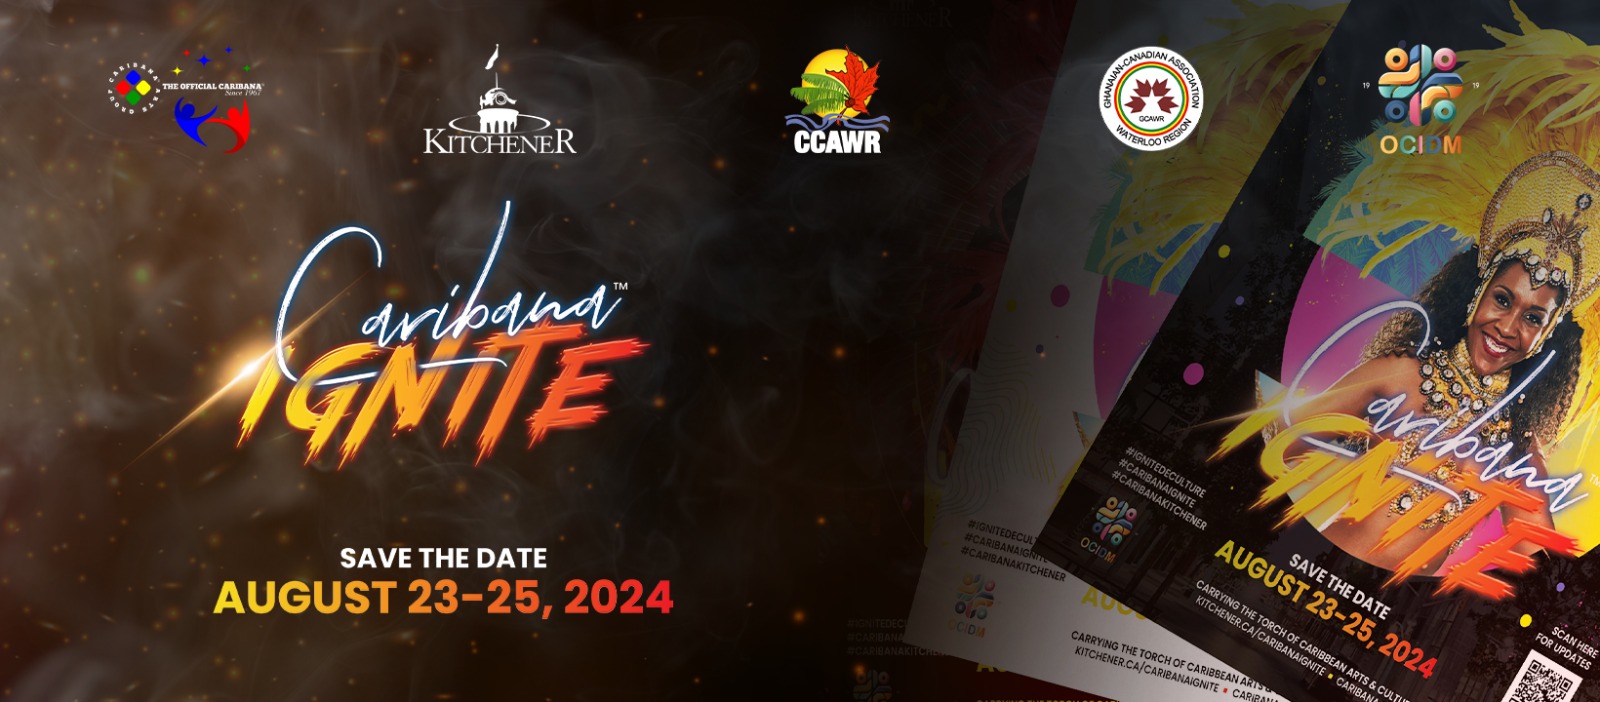 Promotional graphic for Caribana Ignite event scheduled for August 21-25, 2024. Includes logos of event partners and images of themed event posters. Toronto Caribana Carnival: Ultimate Guide to Caribana Festival Events